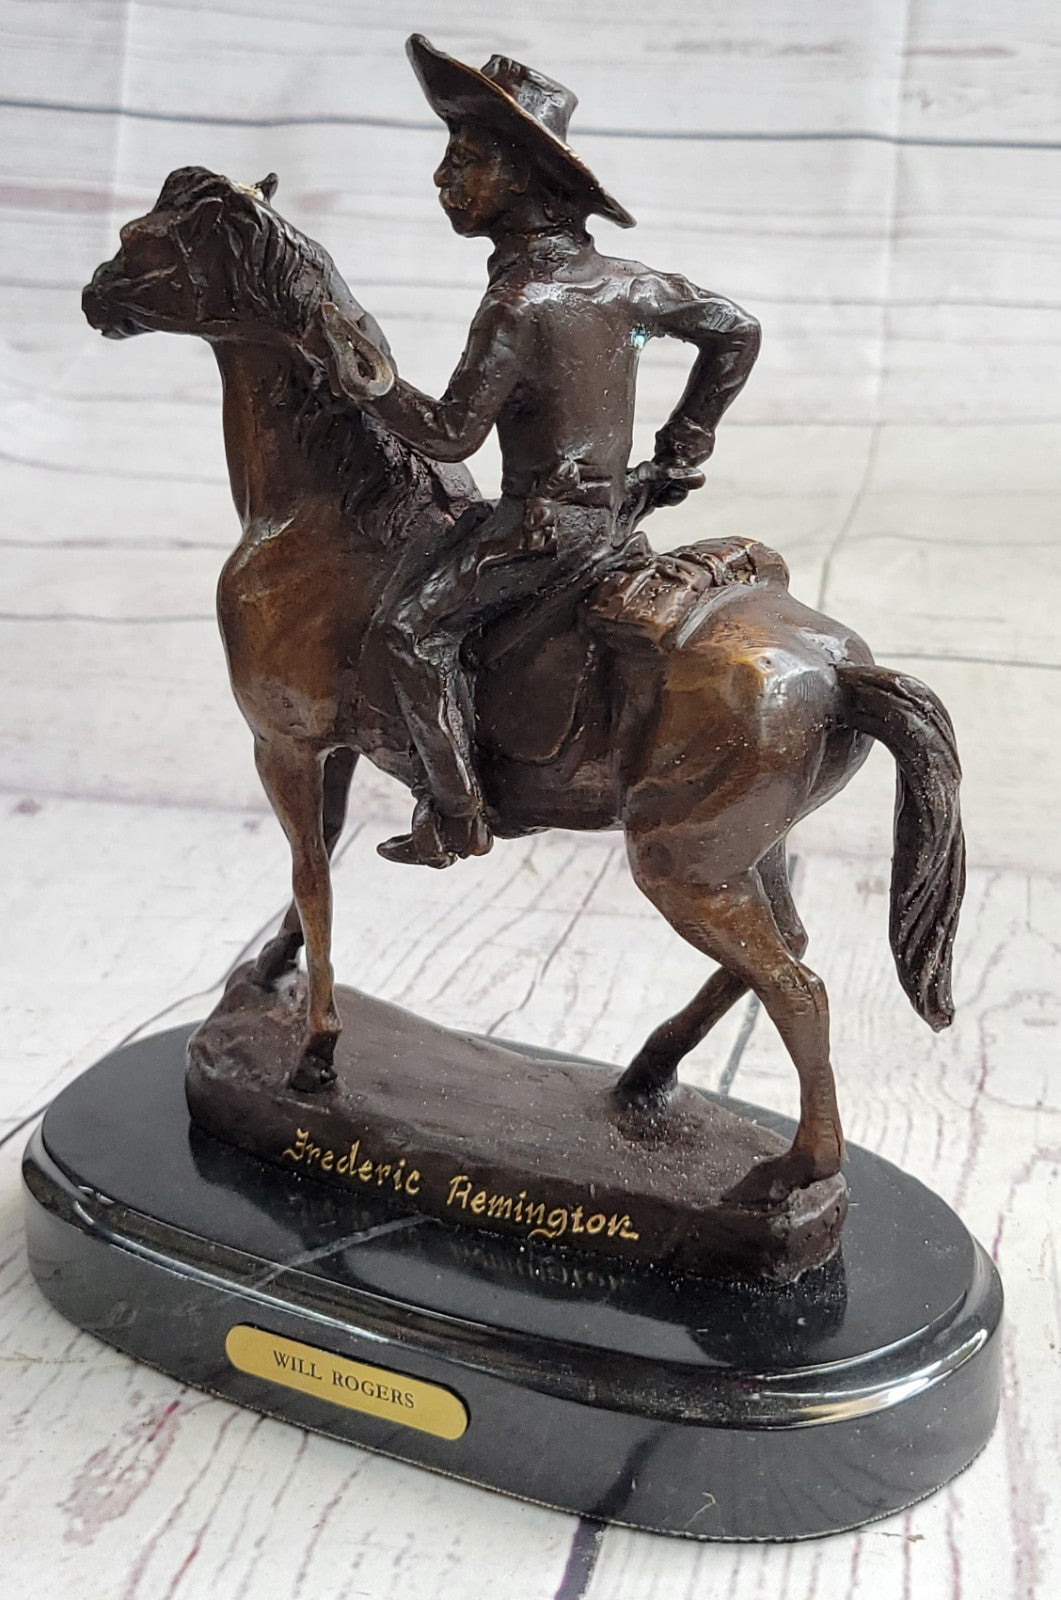 Handcrafted bronze sculpture SALE Marbl W/ Art Russell Charles By " Rogers Will